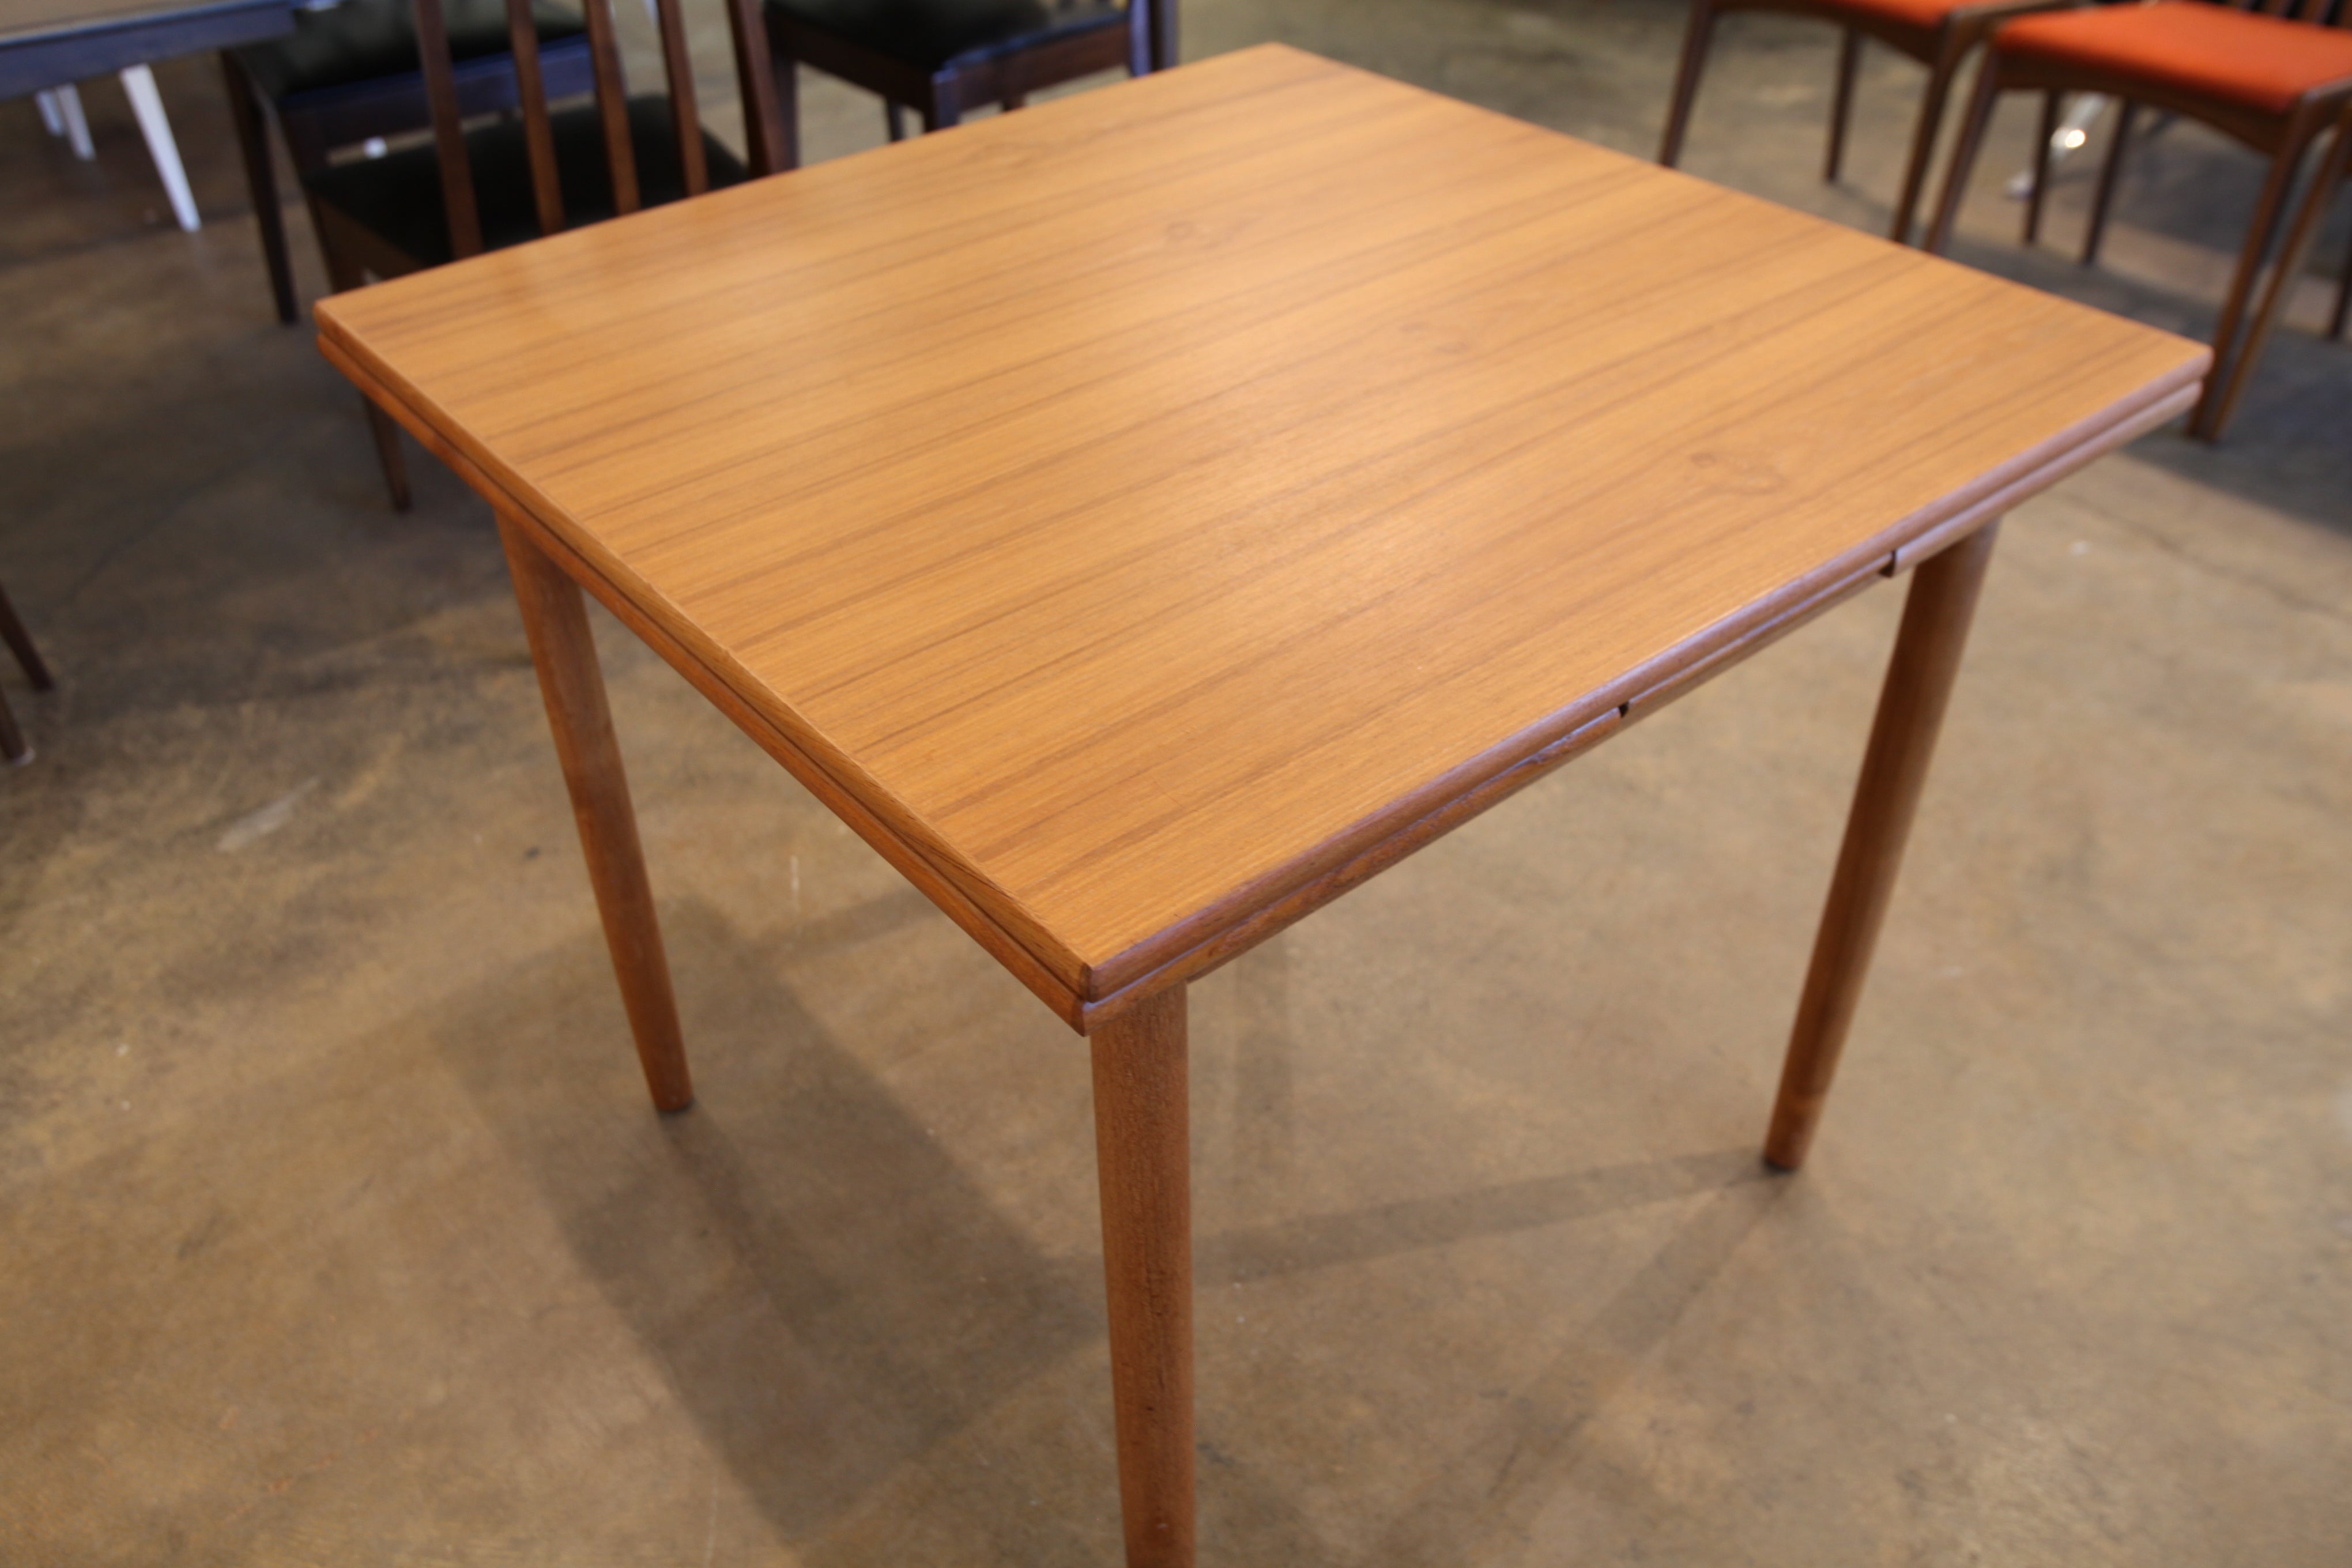 Small Square Vintage Teak Dining Table with Extensions (58.25"x33.5")(33.5"x33.5")